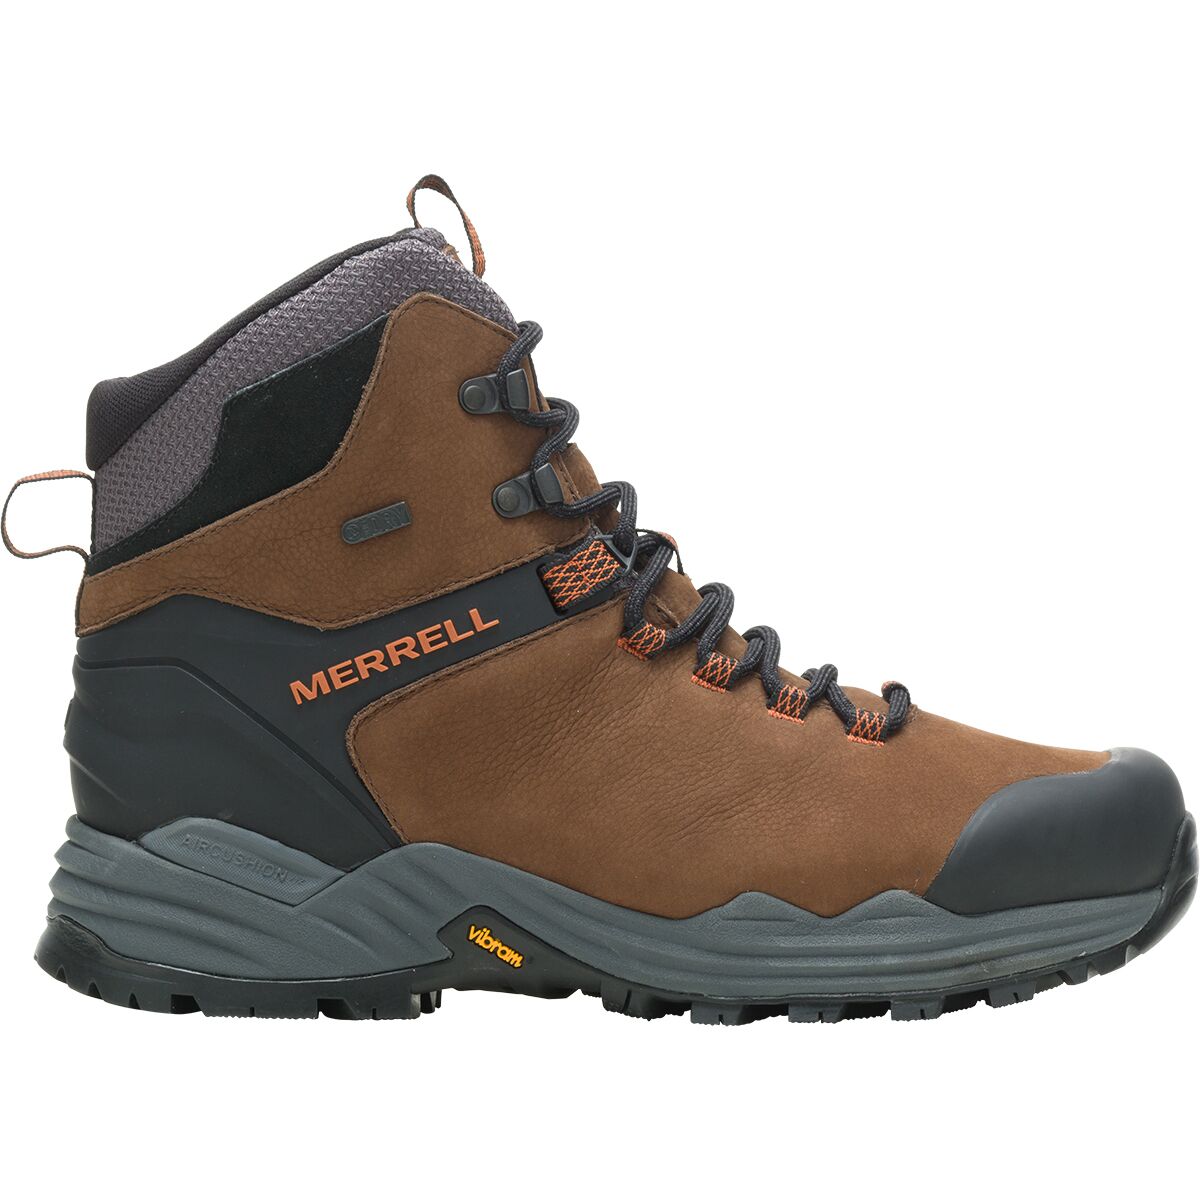 Merrell Phaserbound 2 Tall Waterproof Backpacking Boot - Men's